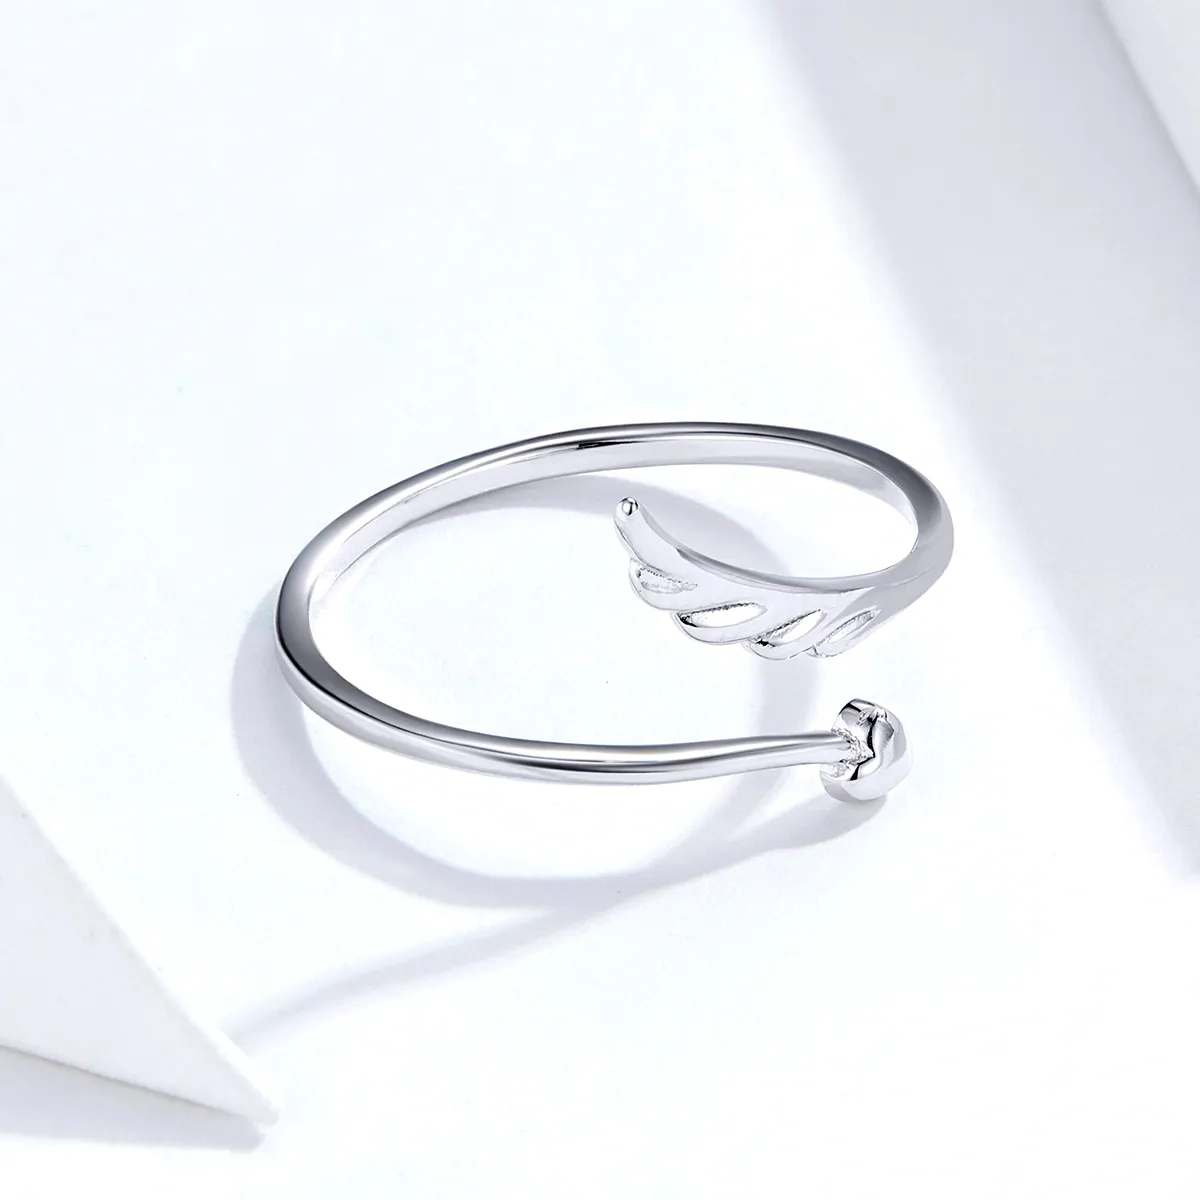 Pandora Style Silver Angel Wing Open Ring - SCR567